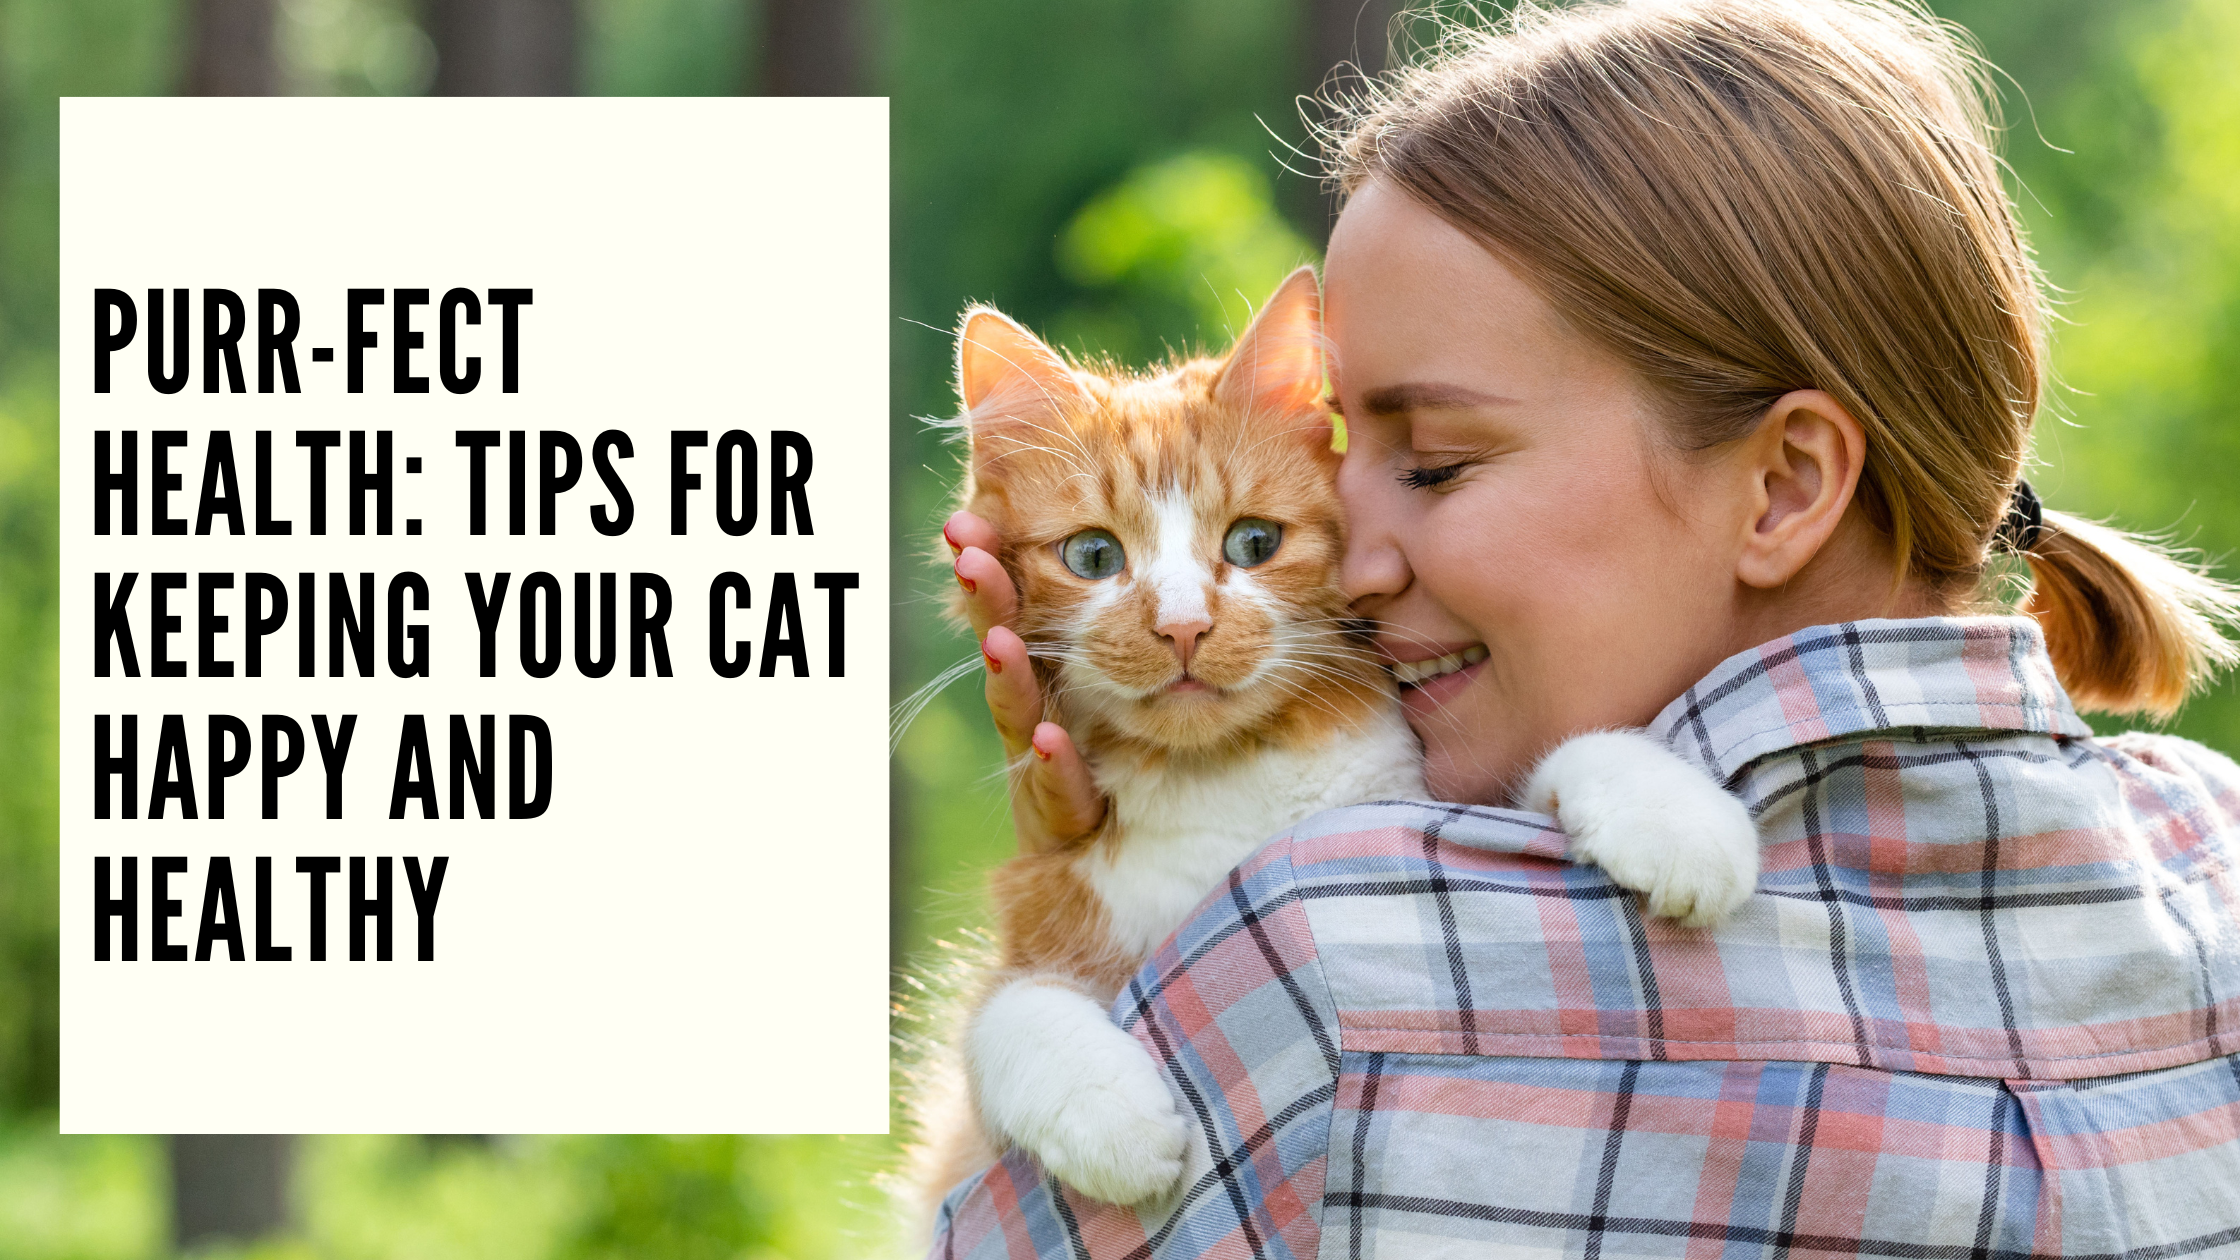 Purr-fect Health Tips for Keeping Your Cat Happy and Healthy